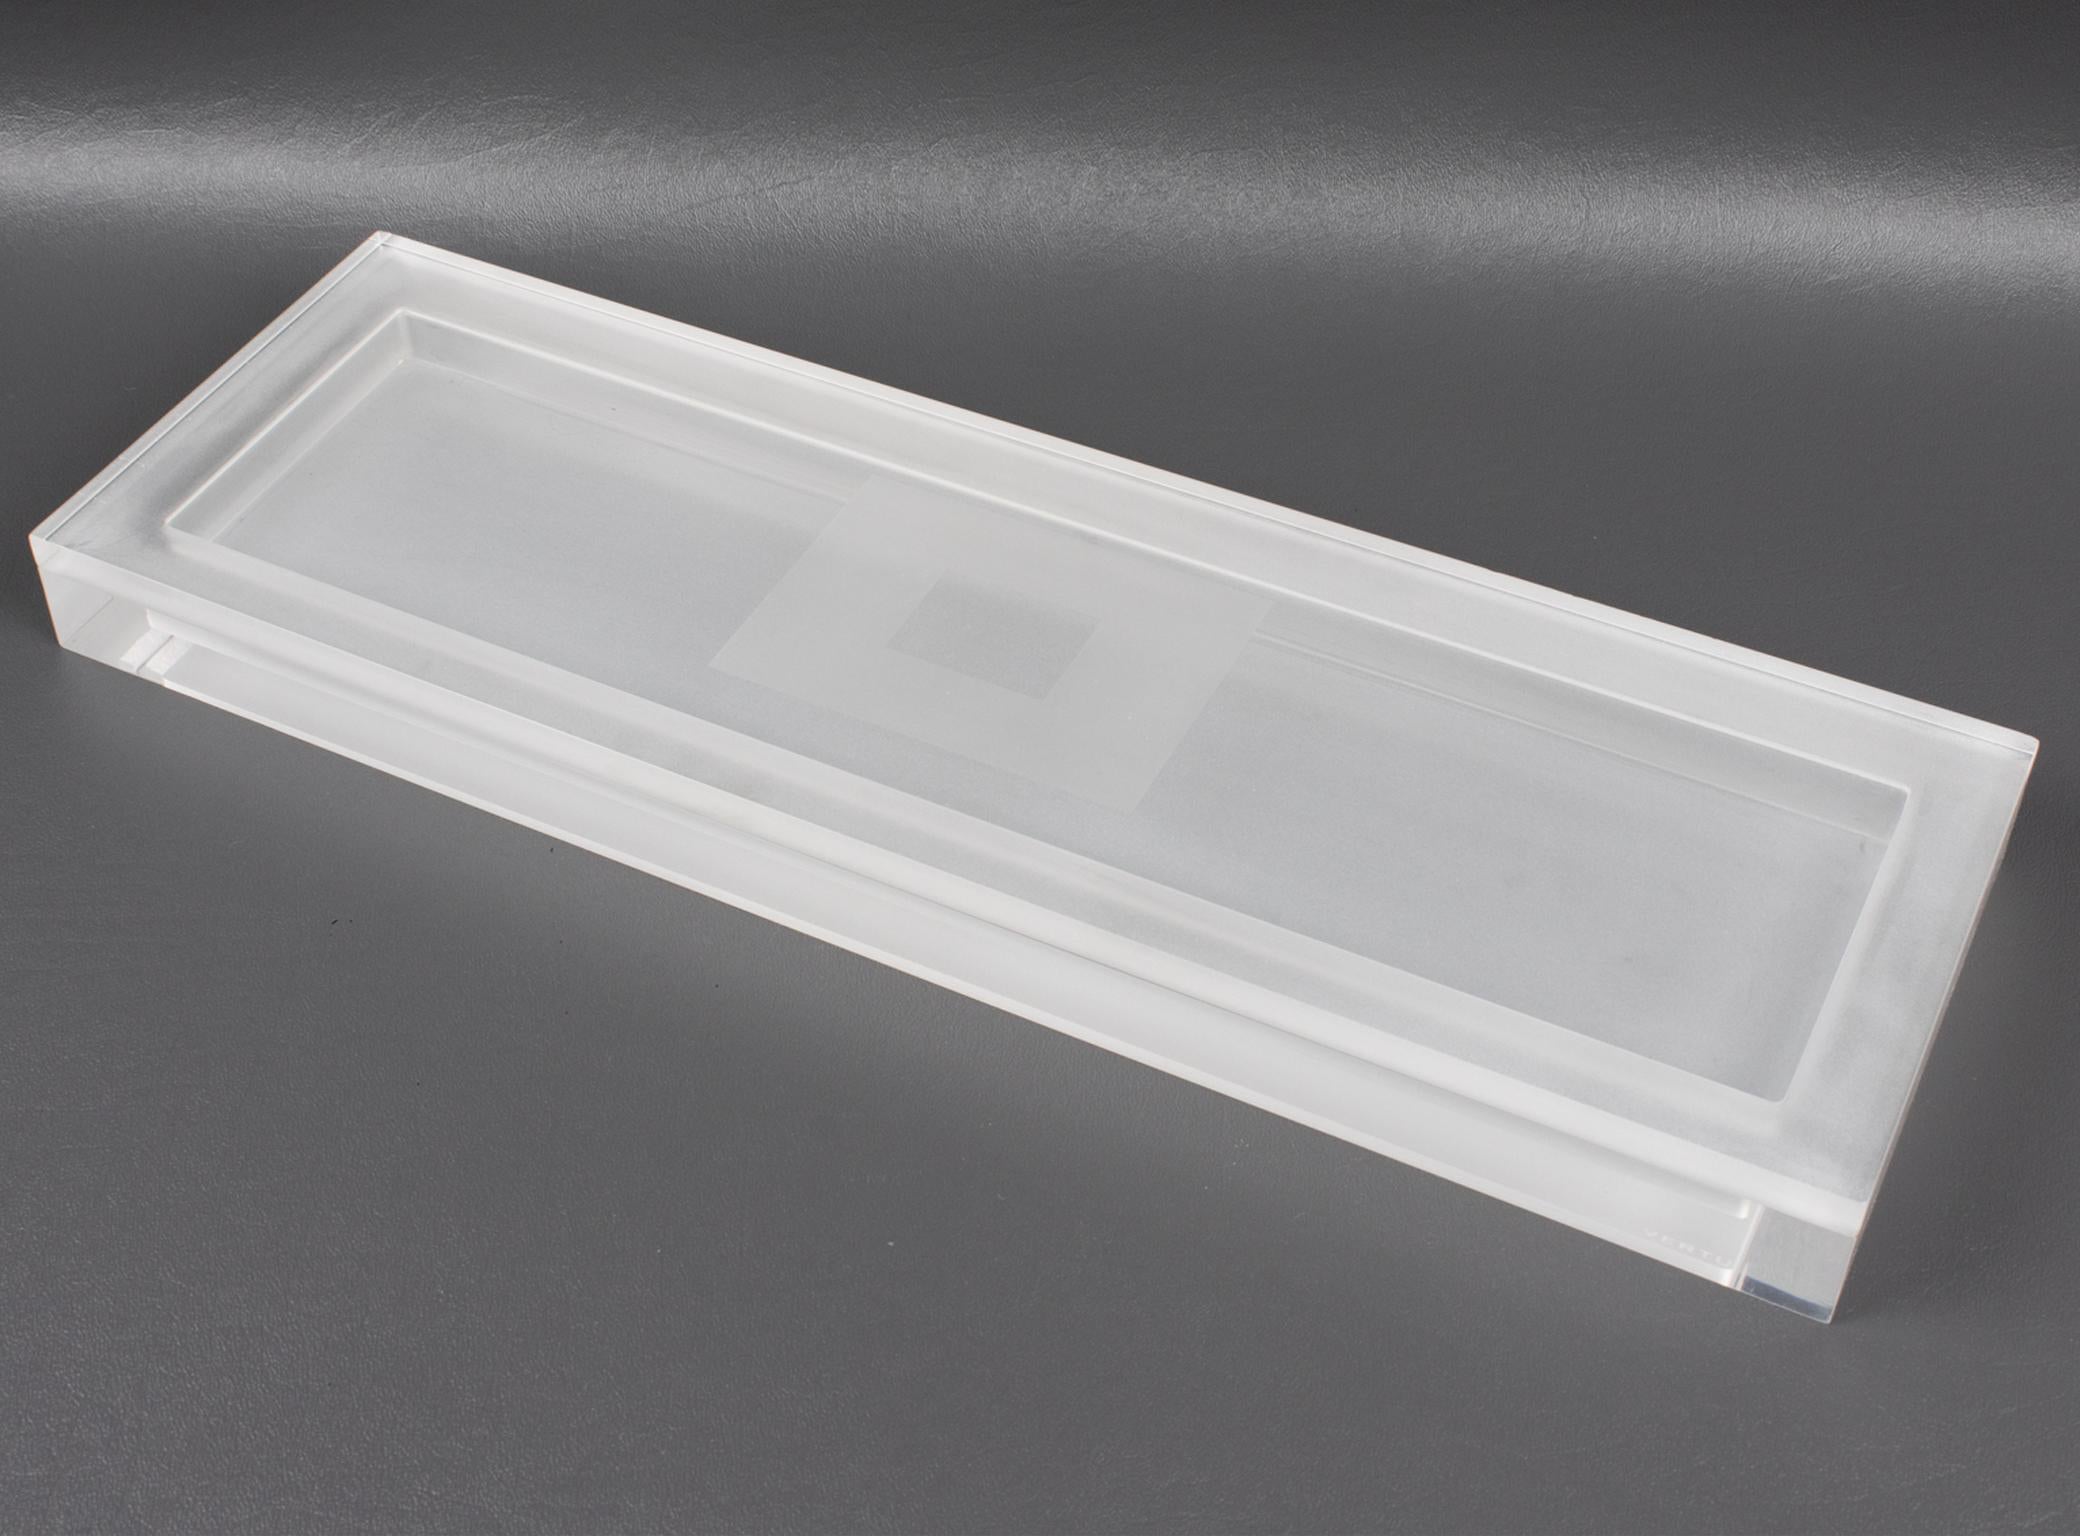 Modernist Long and Flat Lucite Box, 1980s For Sale 6